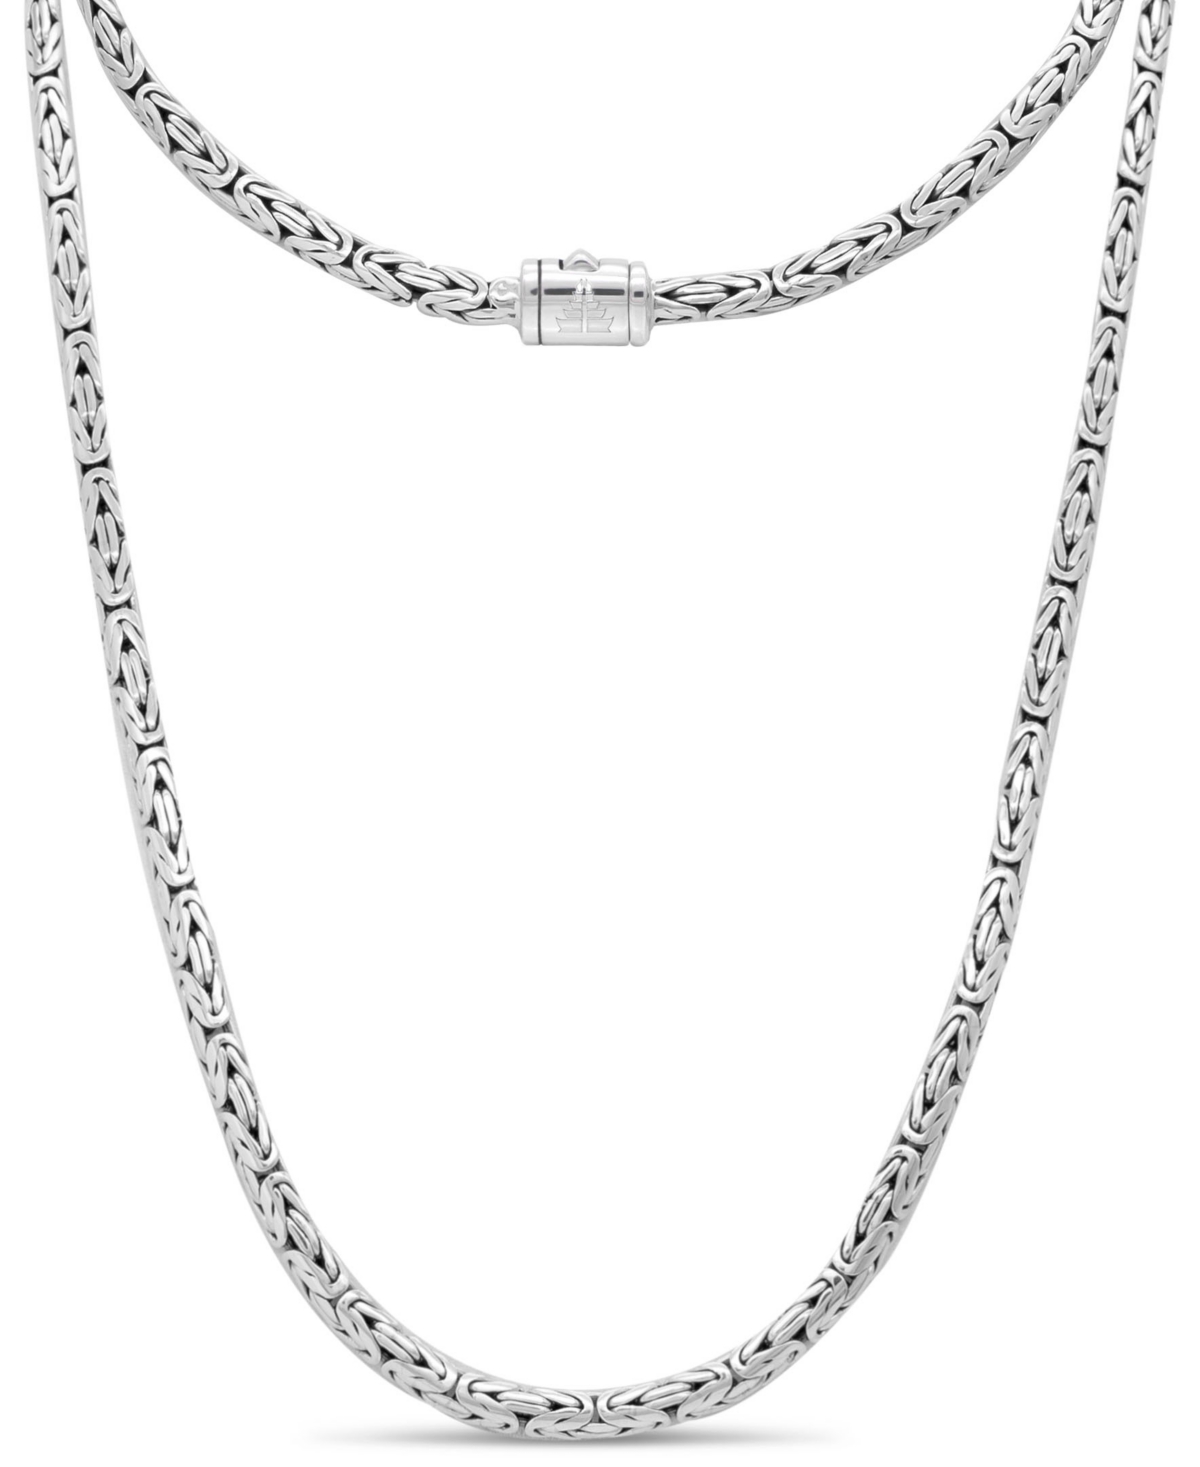 Borobudur Oval 5mm Chain Necklace in Sterling Silver - Silver